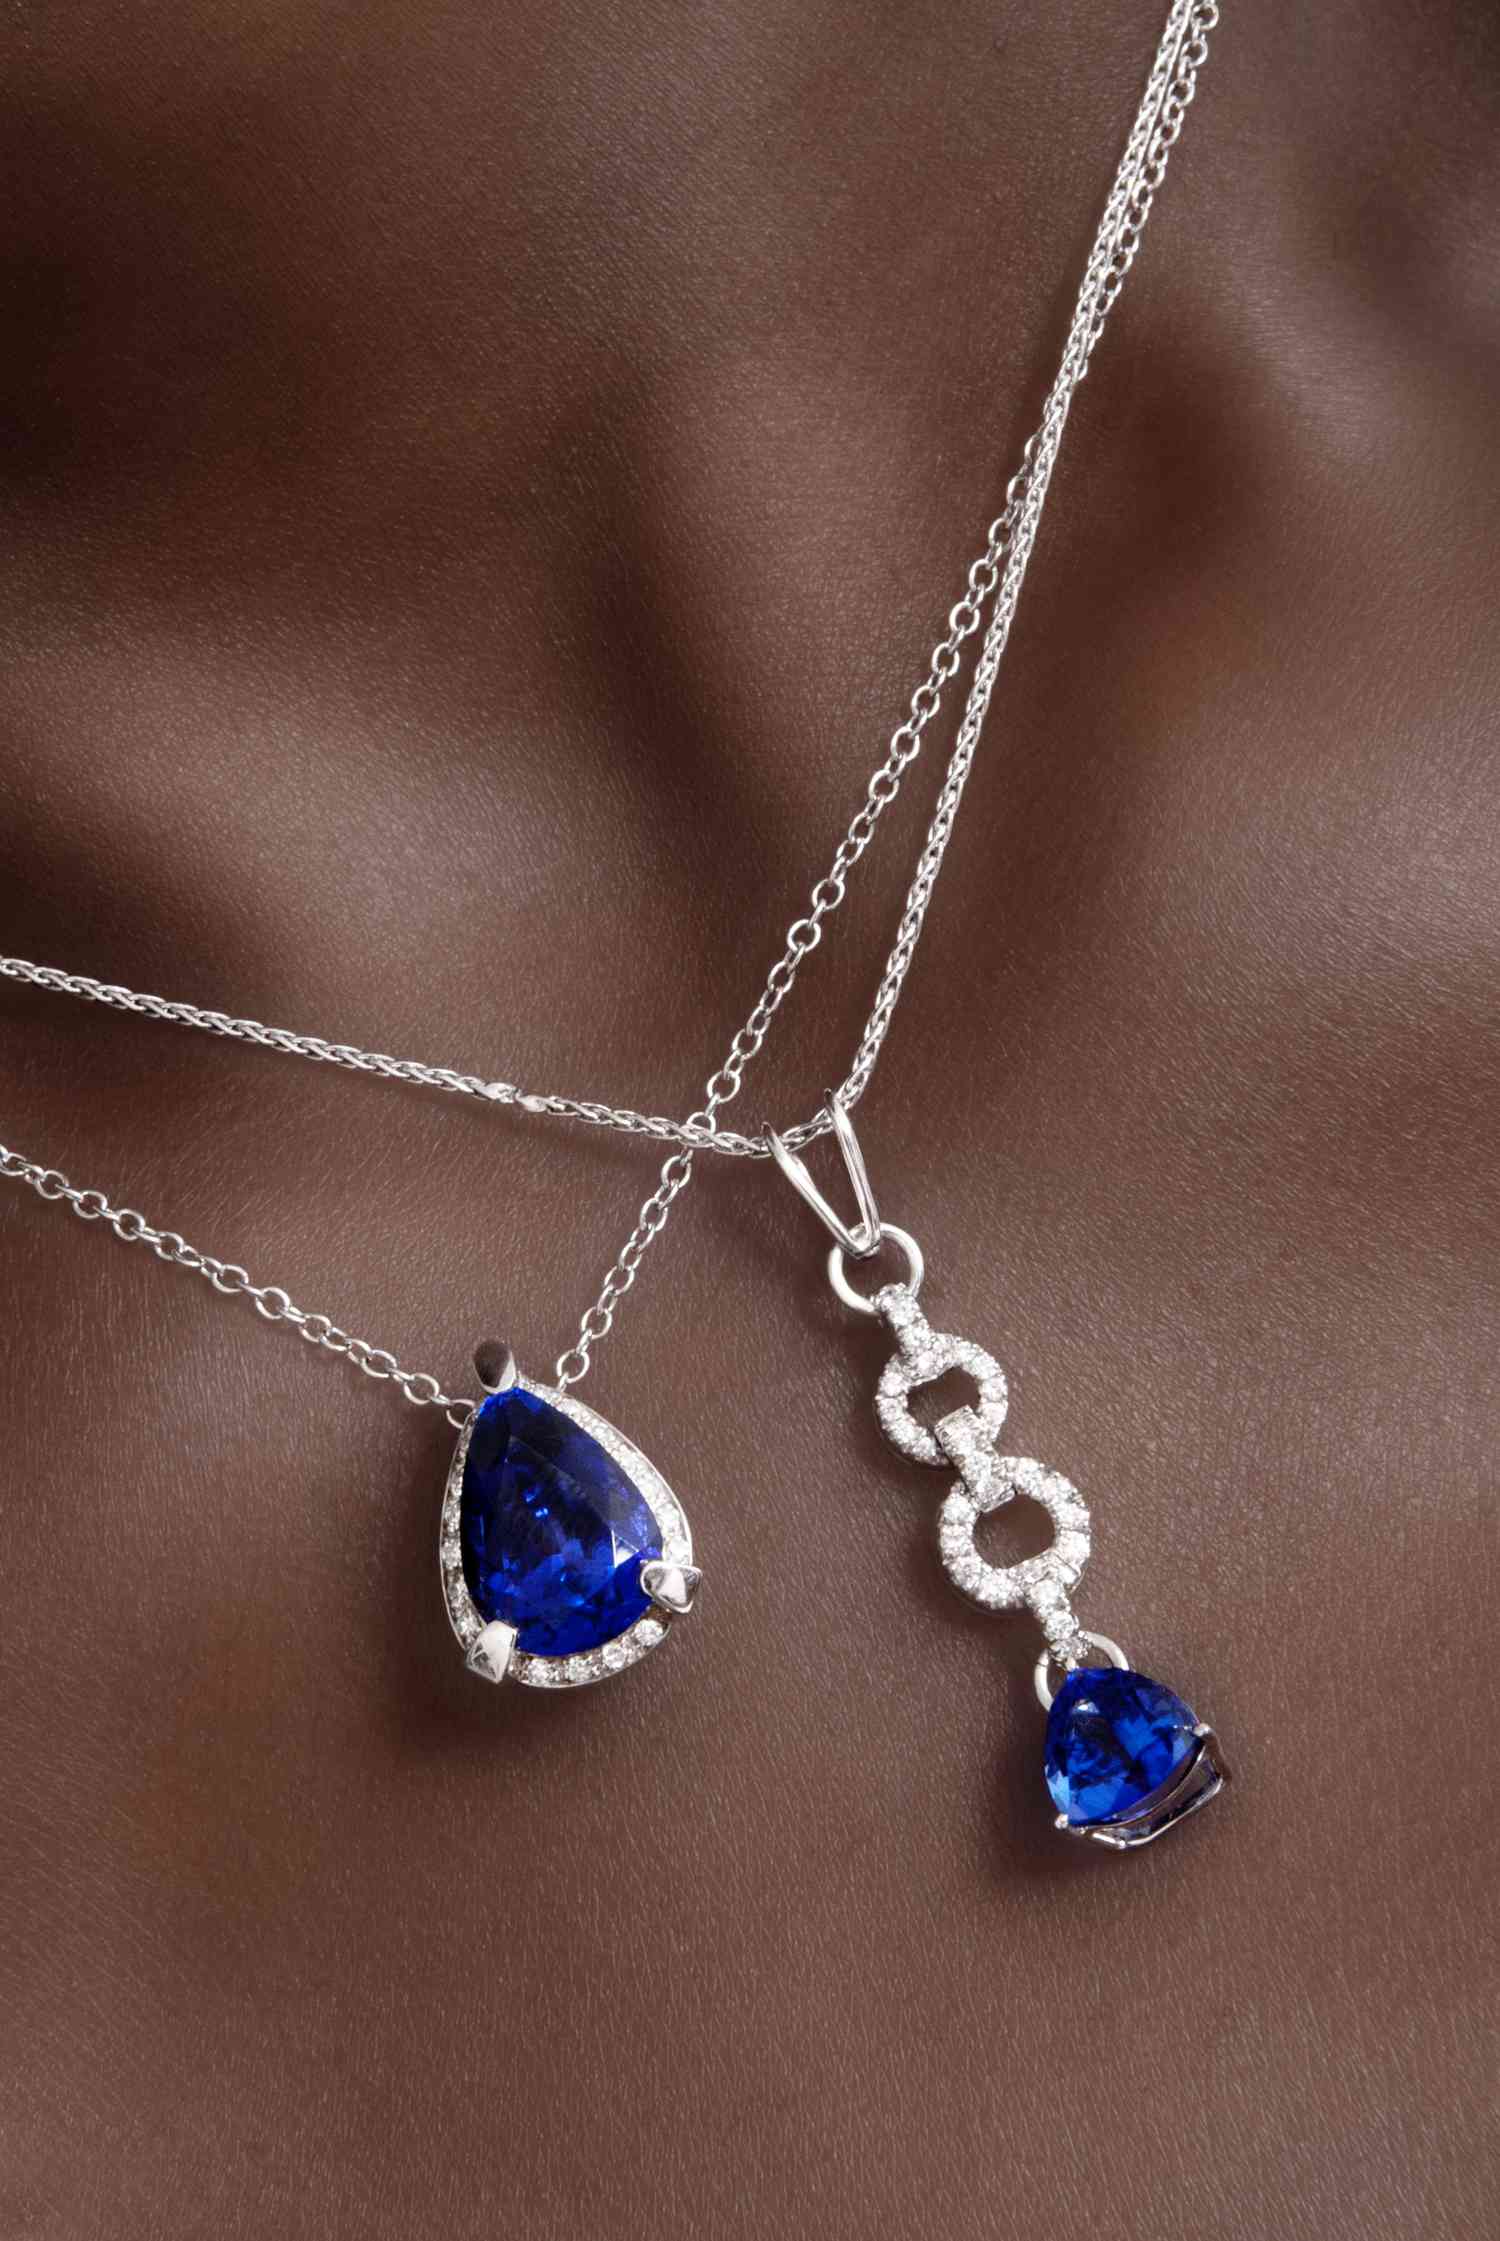 A close-up shot of two necklaces with diamond and sapphire gemstones on silver chains